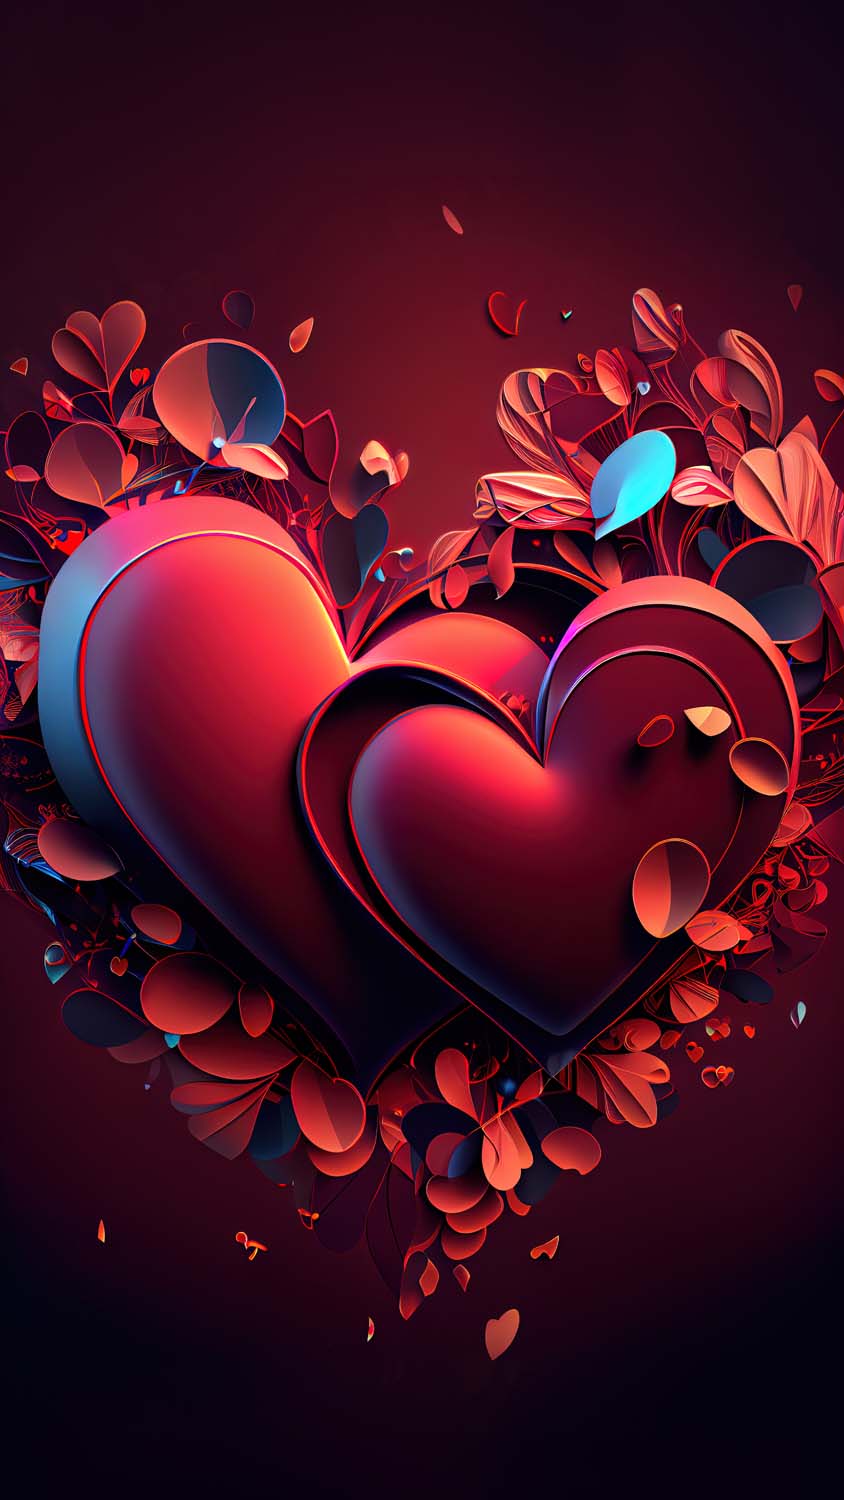 Hearts Love IPhone Wallpaper HD - IPhone Wallpapers : iPhone ...